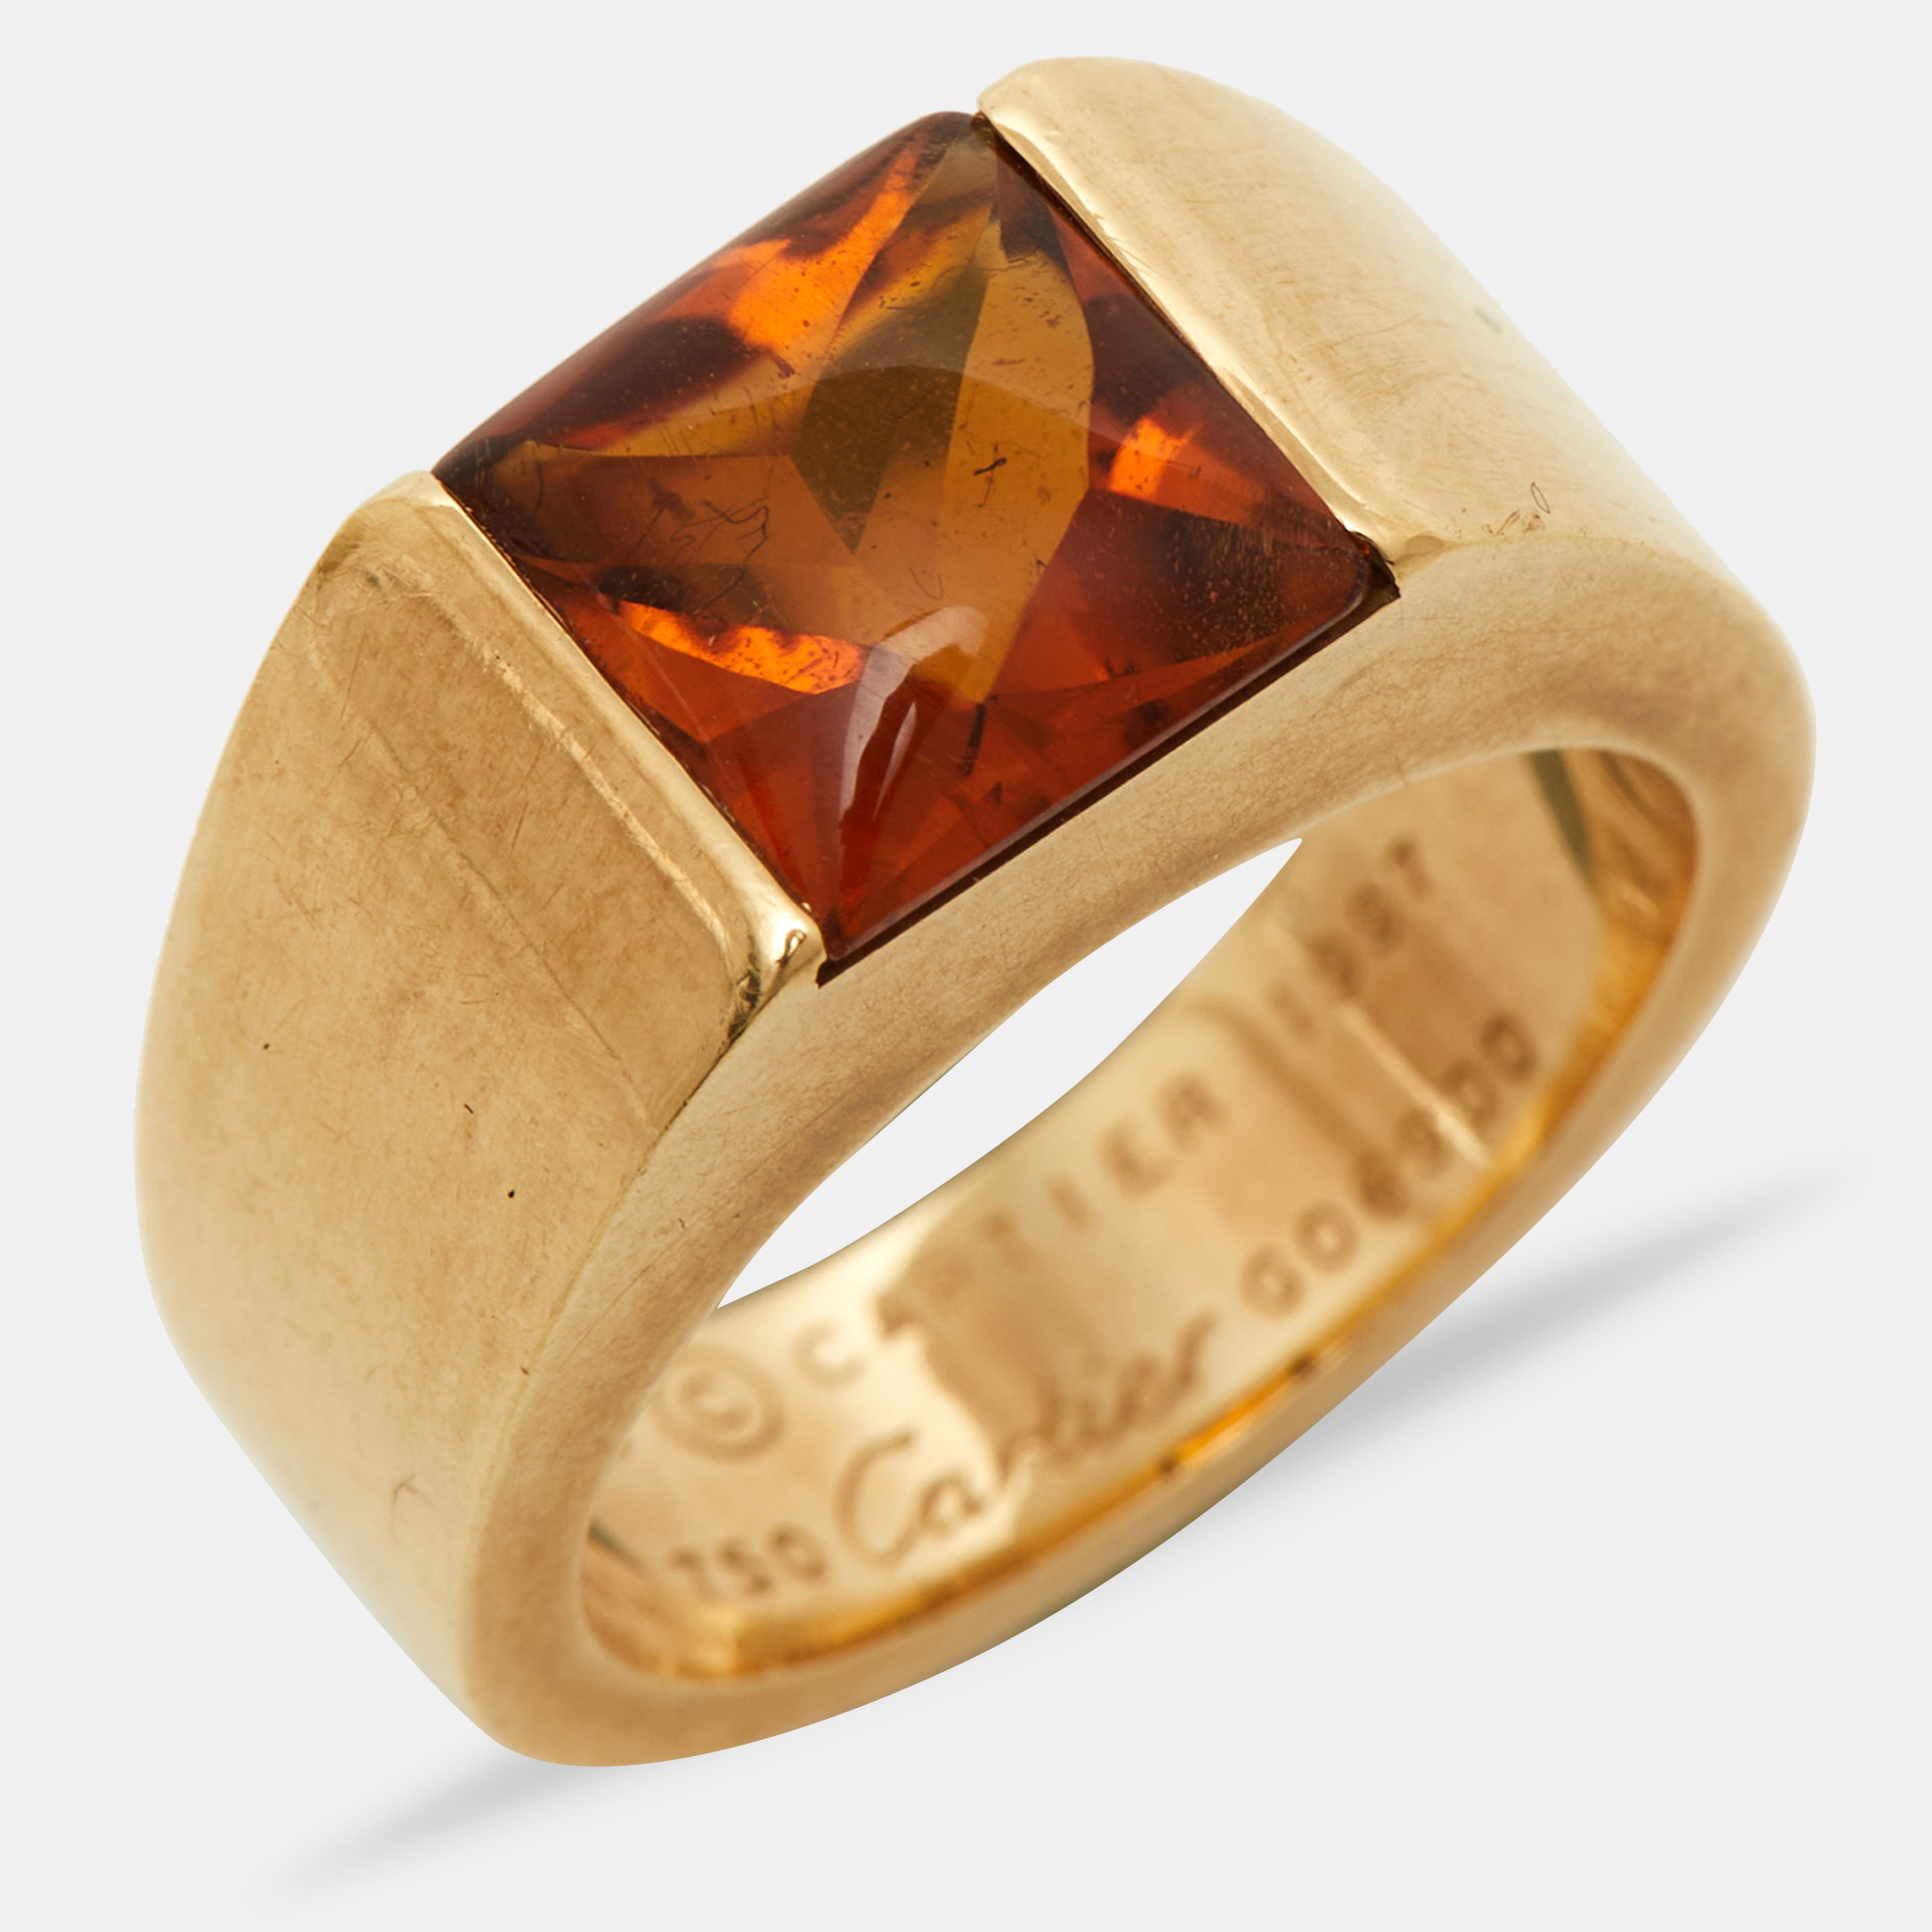 Cartier Tank Citrine 18k Yellow Gold Ring Size 49